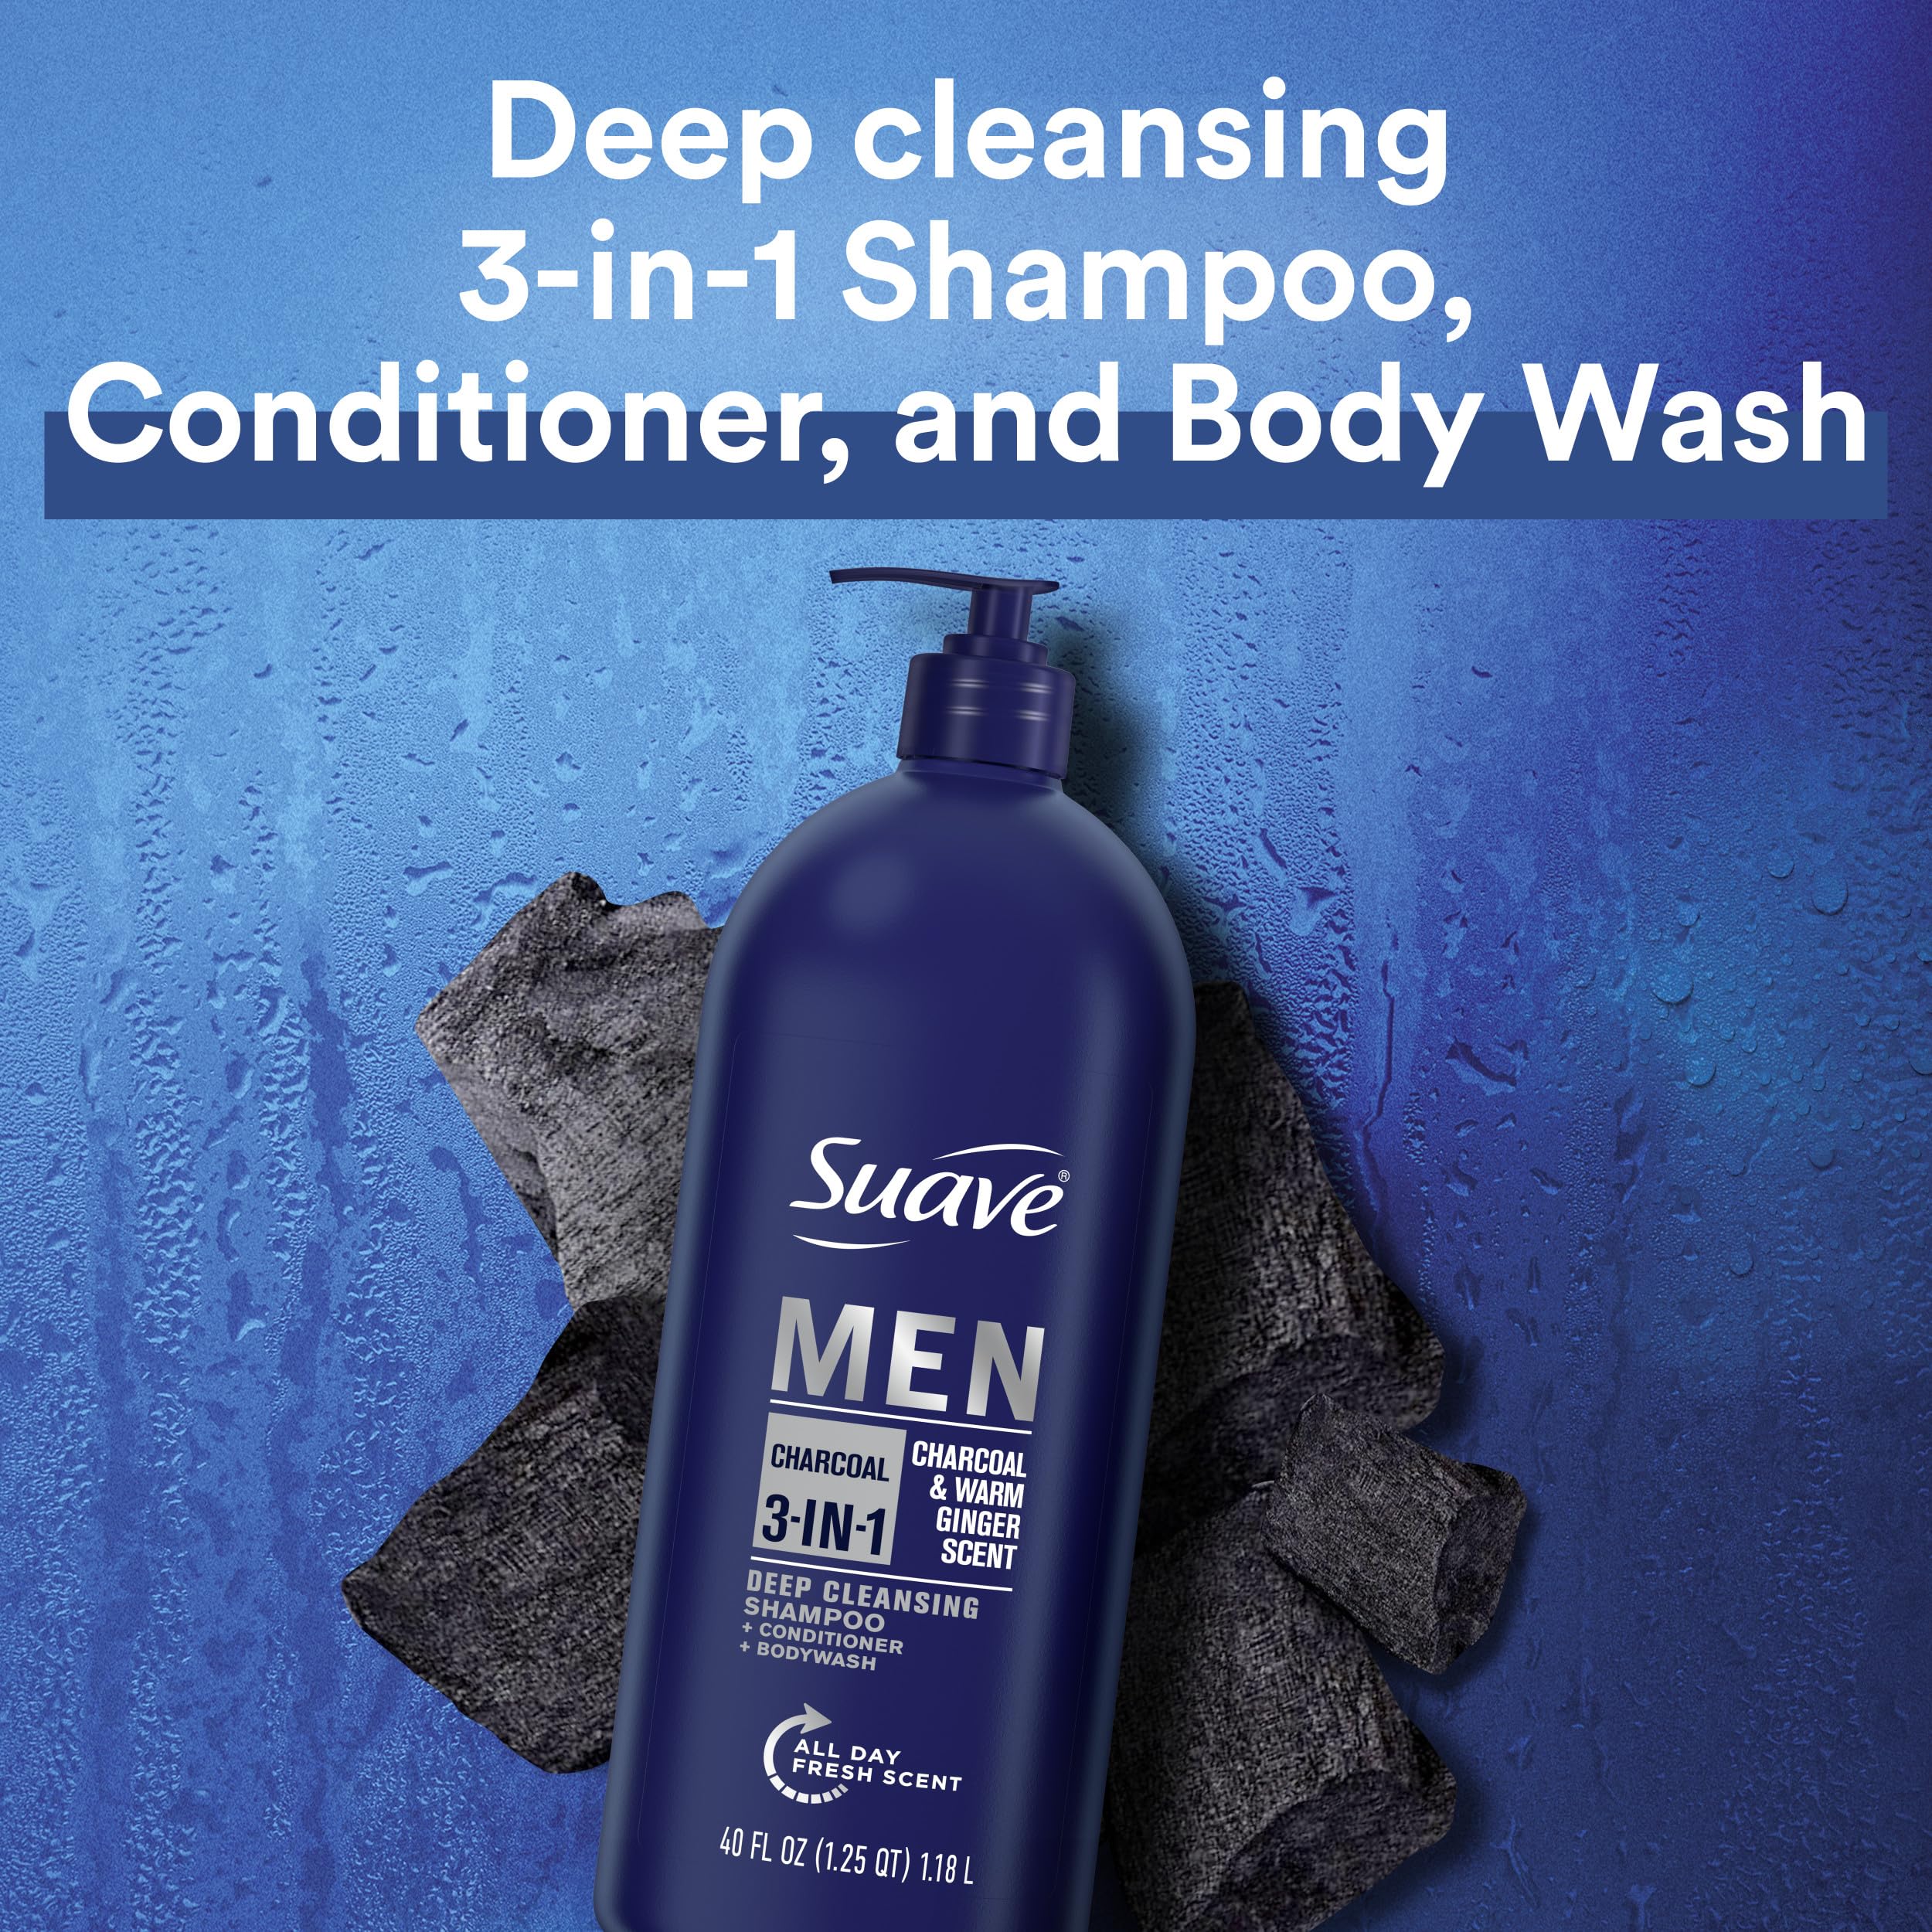 Suave Men 3 in 1 Charcoal &Warm Ginger Shampoo Conditioner Bodywash to Cleanse and Nourish Hair and Skin, 40 oz Pack of 3